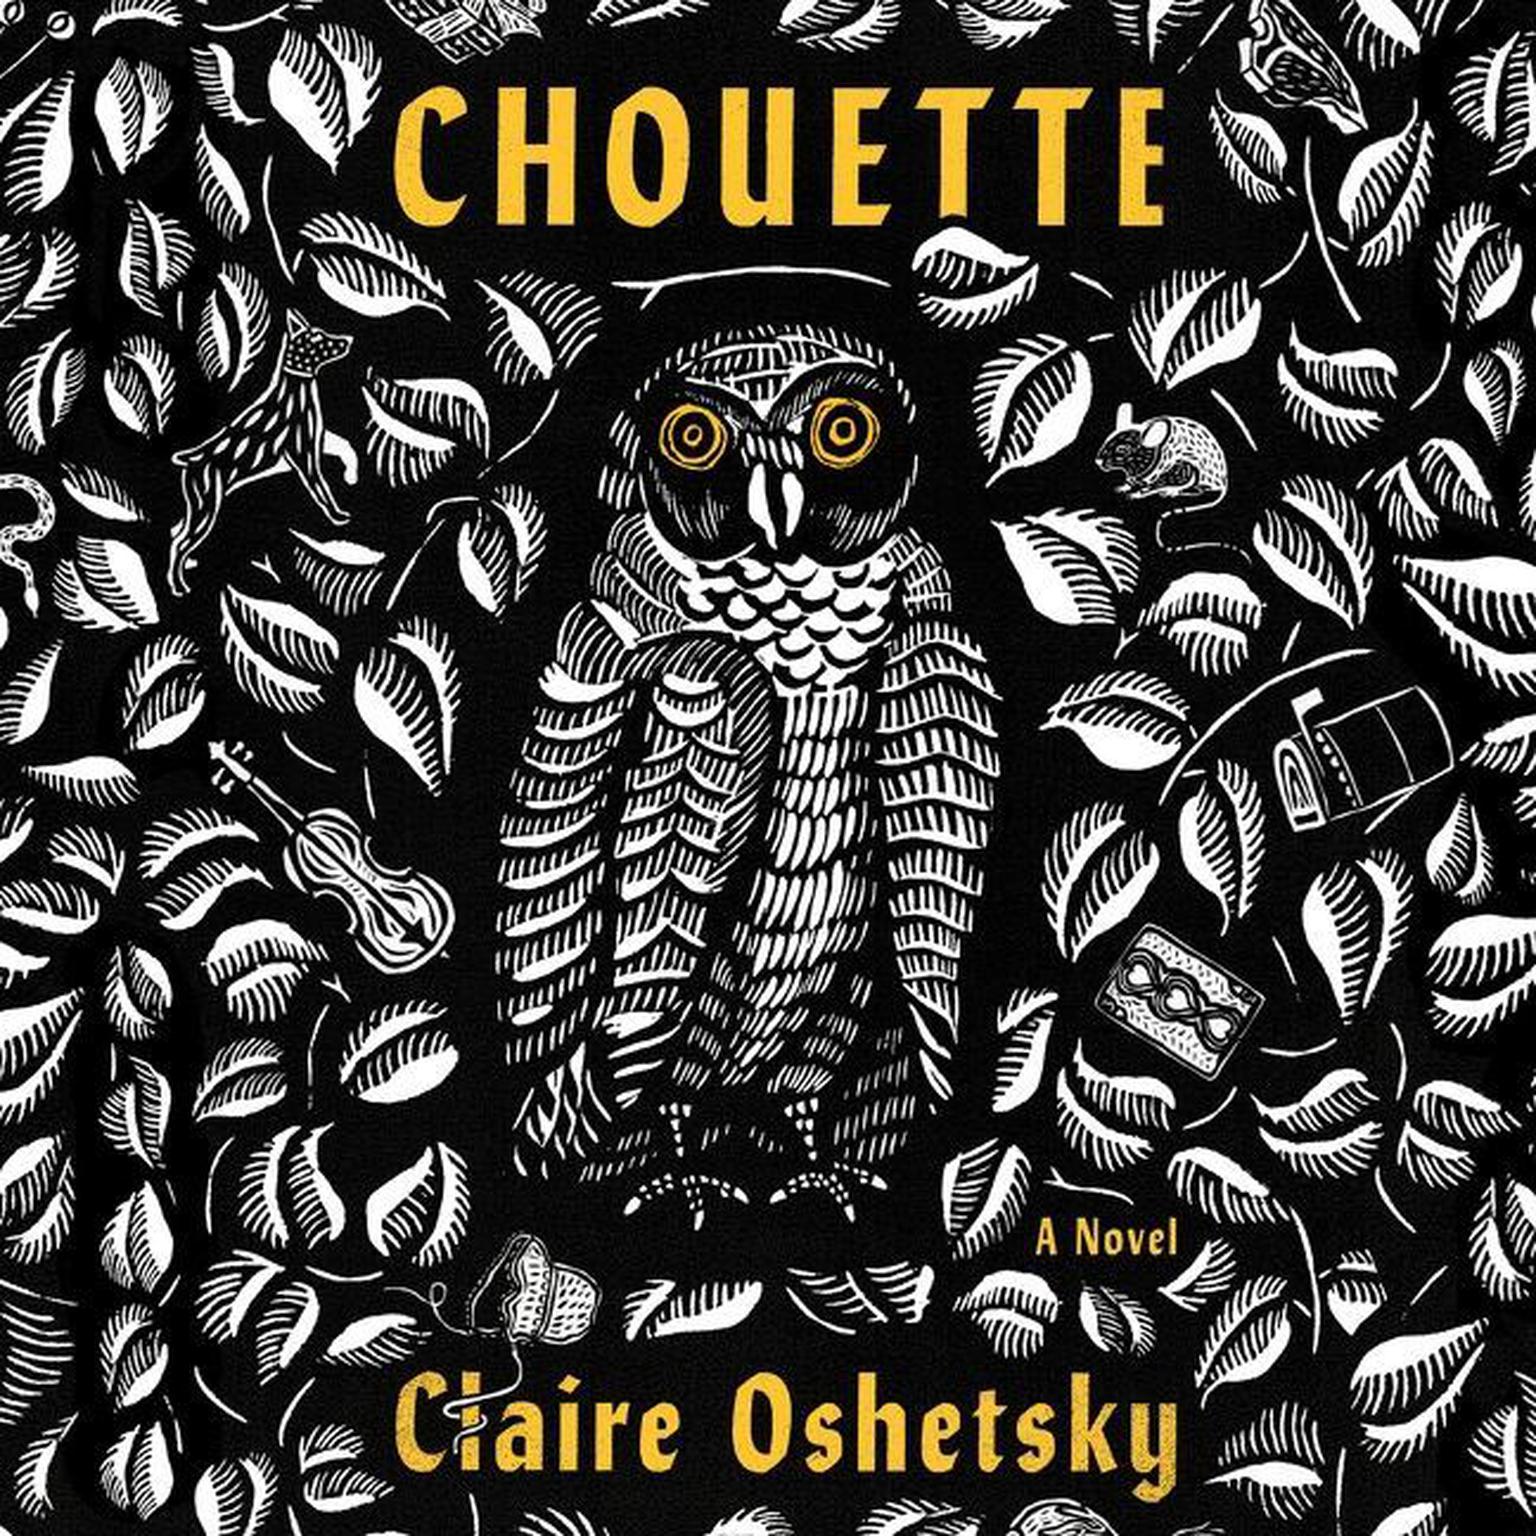 Chouette: A Novel Audiobook, by Claire Oshetsky